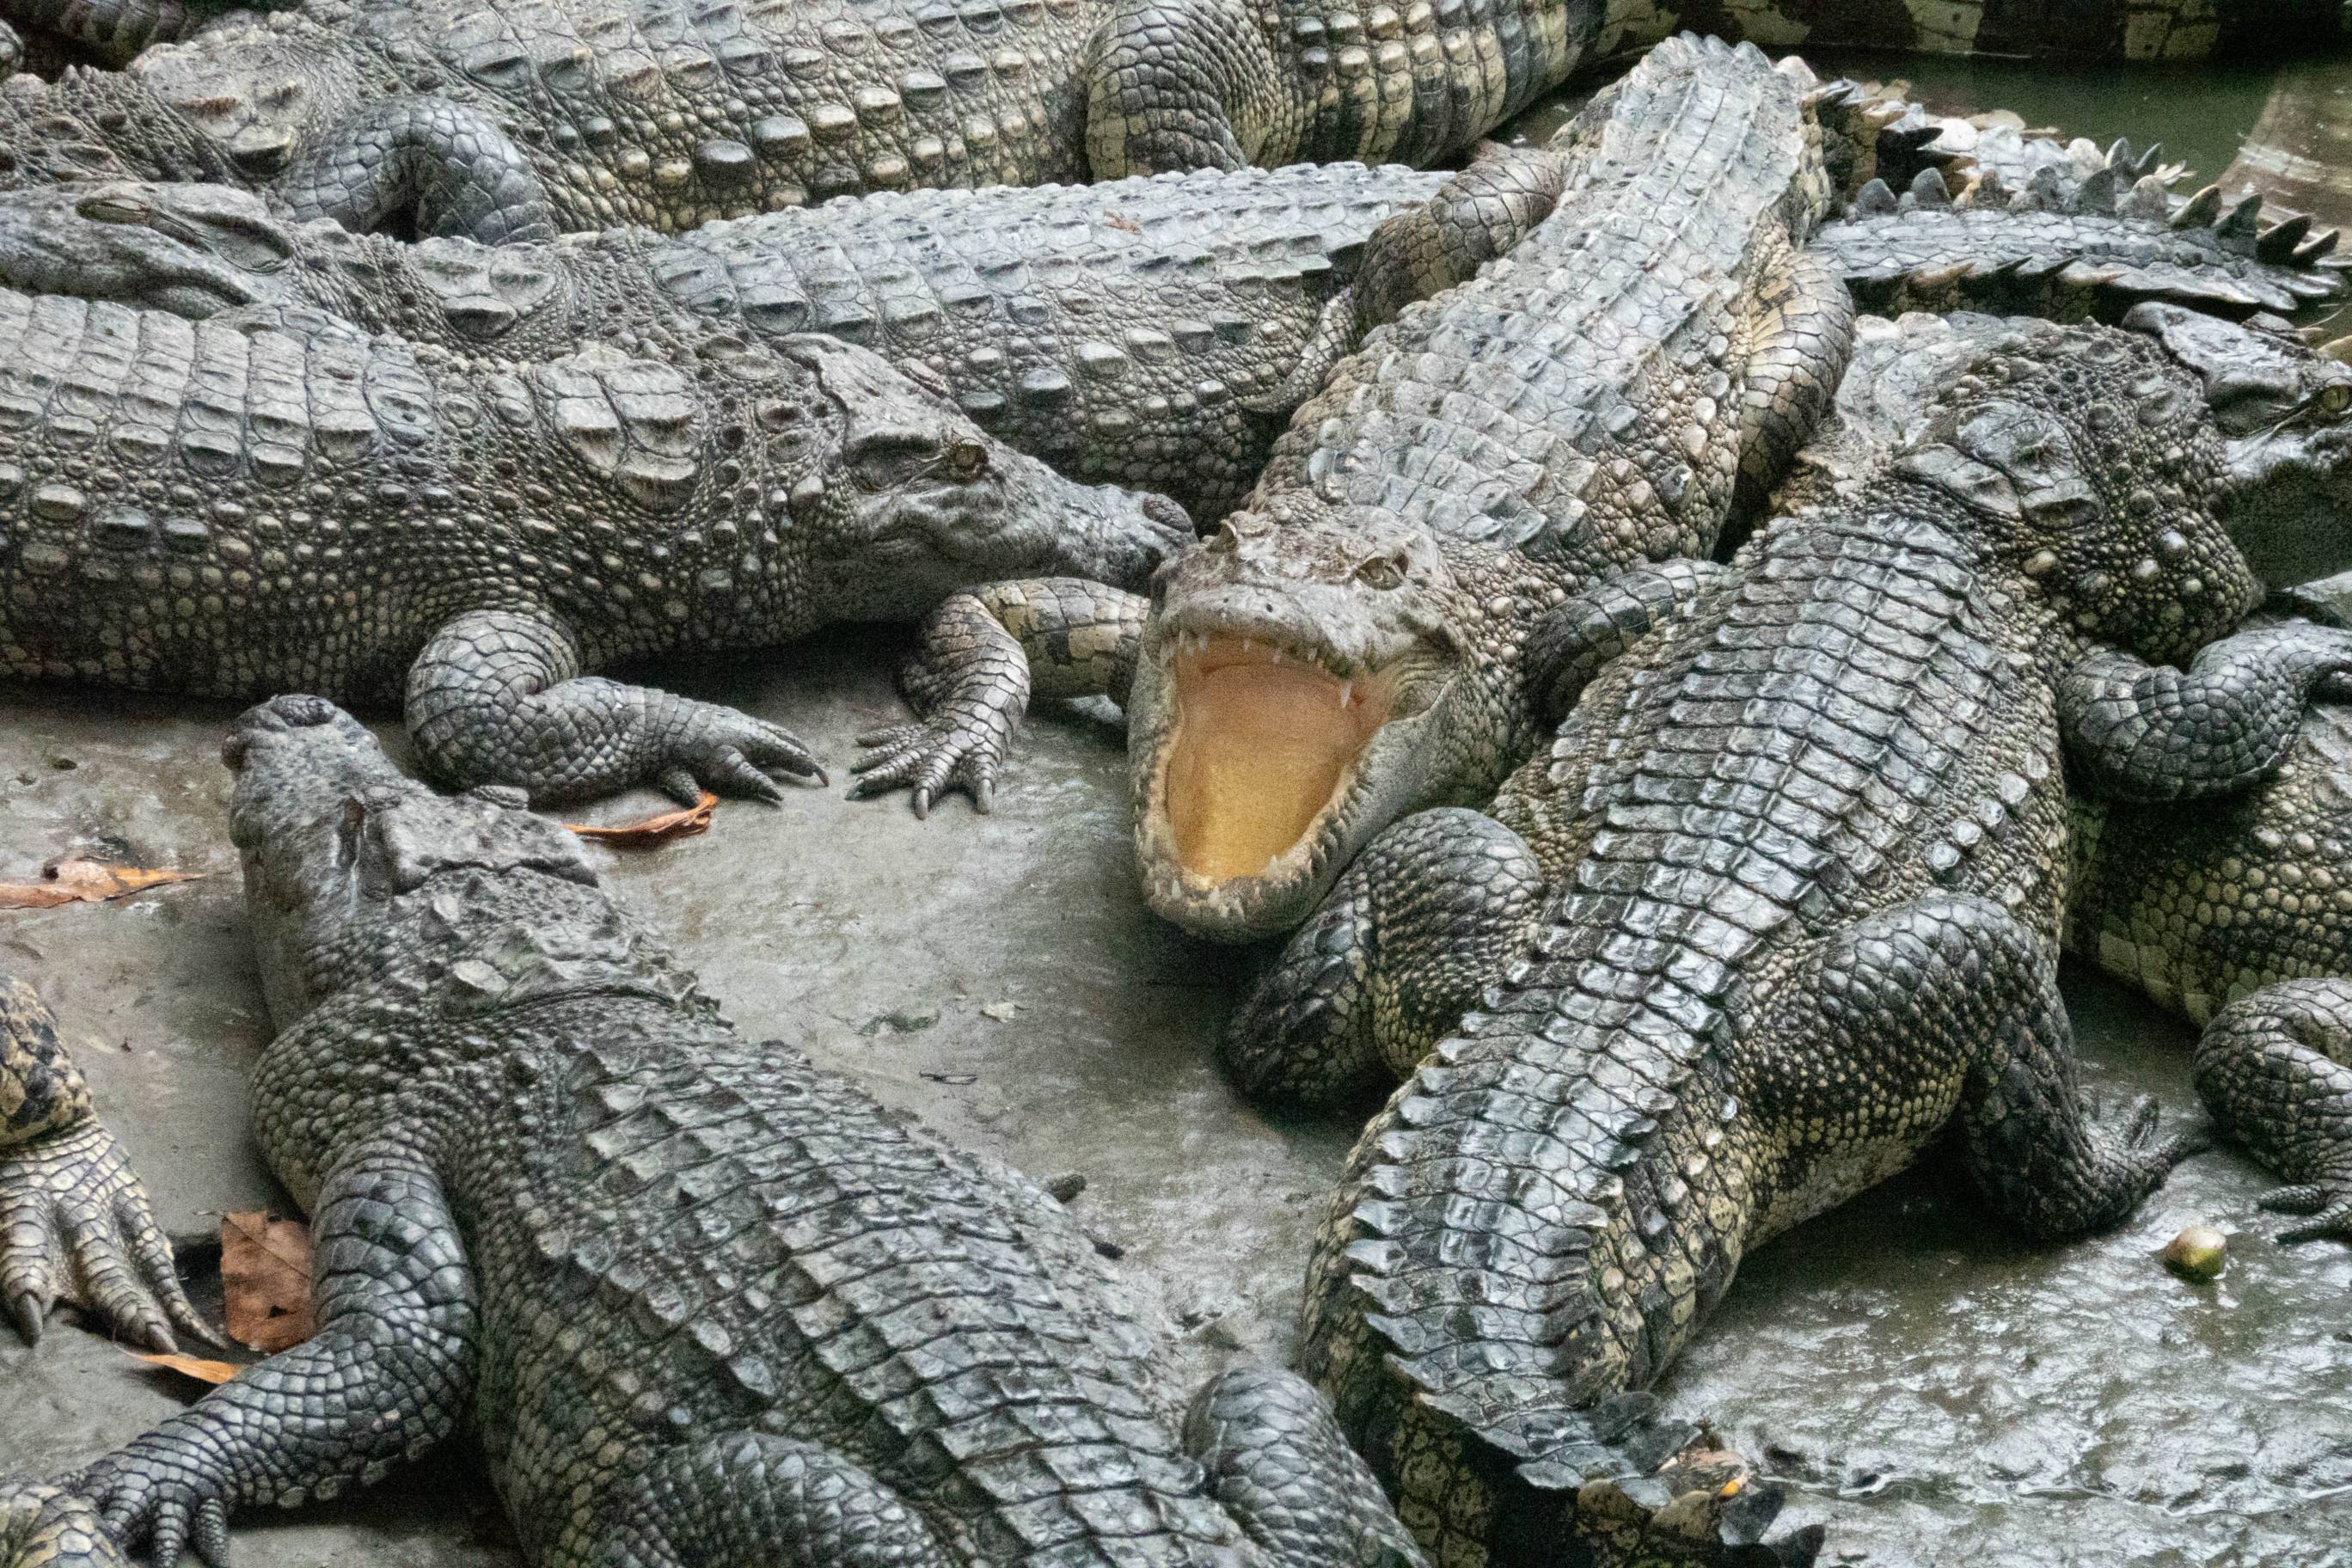 picture of alligators. one alligator has his mouth open 